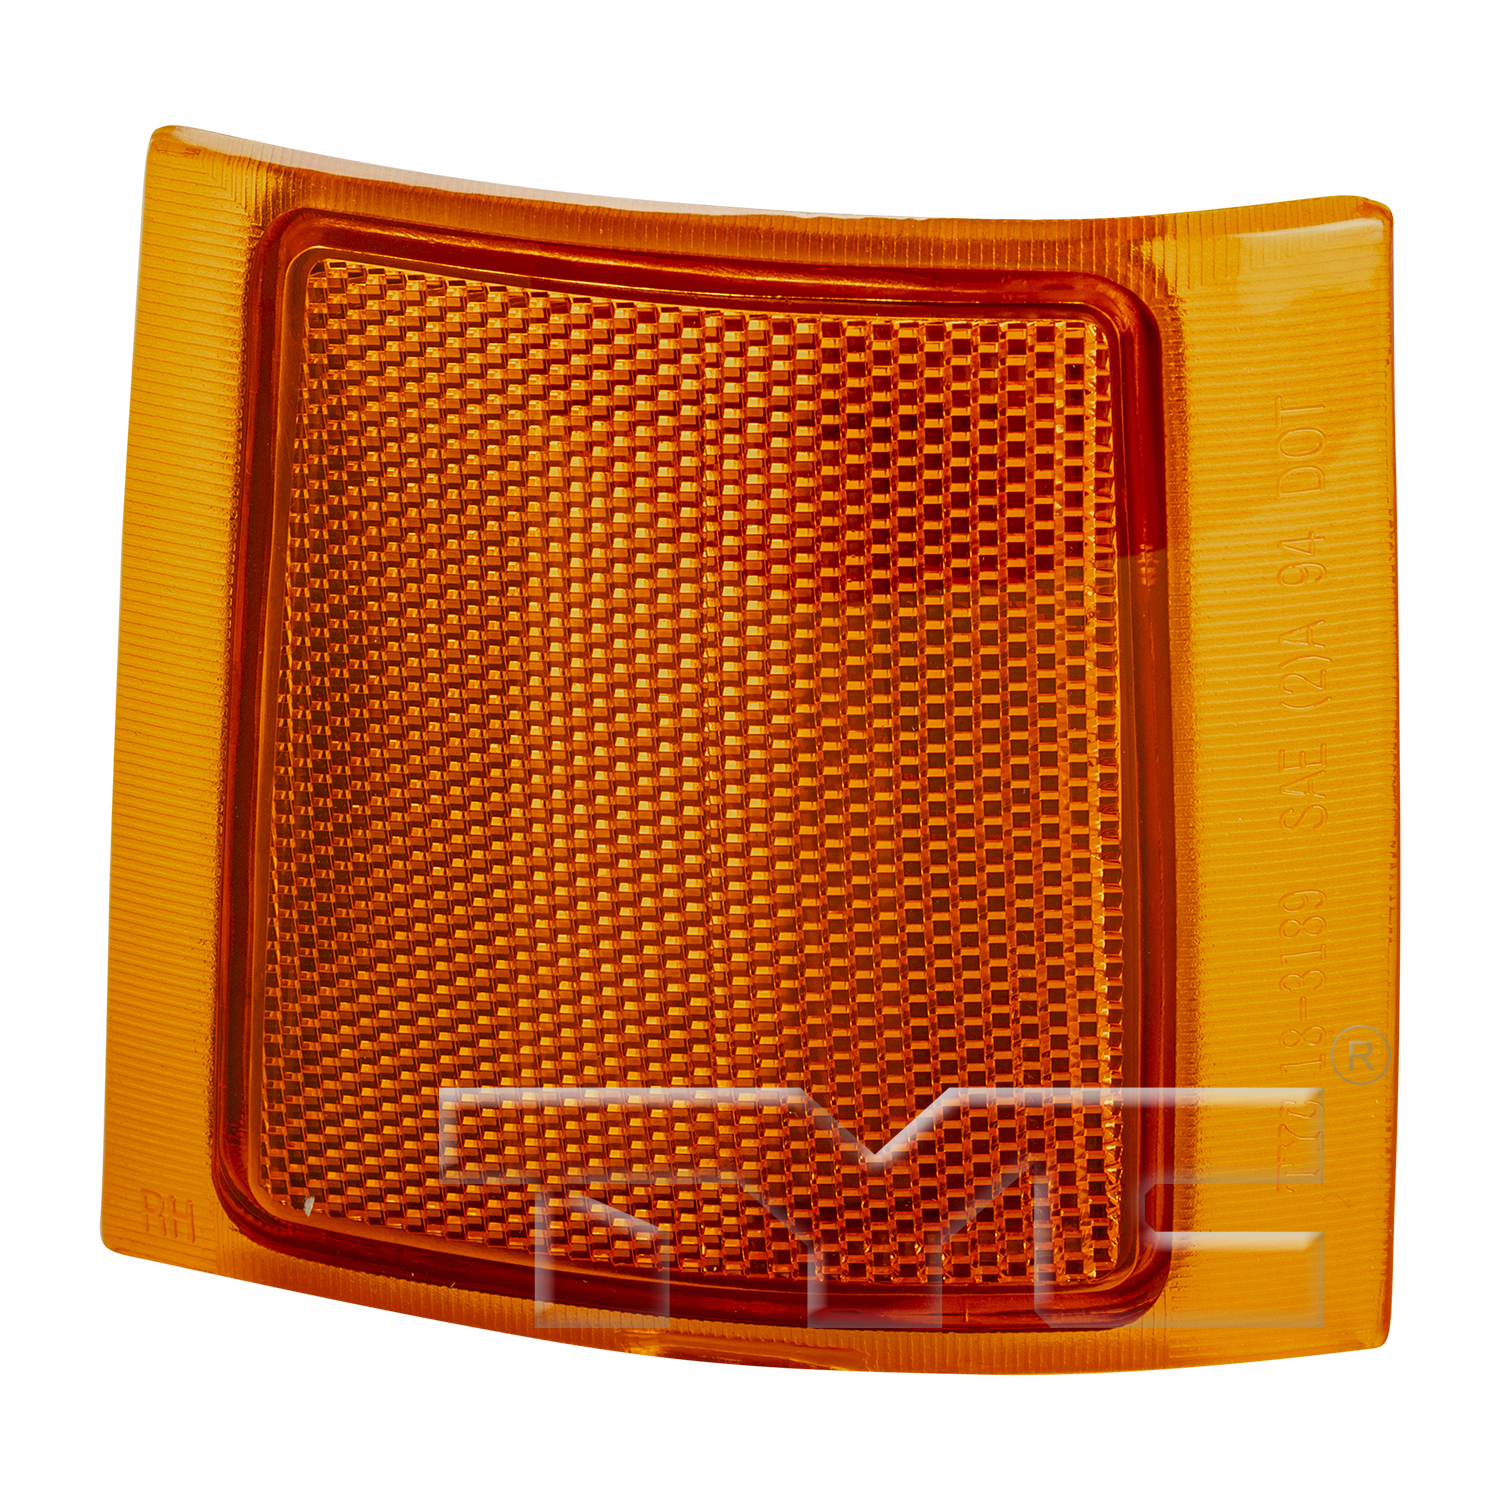 Aftermarket LAMPS for CHEVROLET - C2500 SUBURBAN, C2500 SUBURBAN,94-99,RT Front marker lamp assy